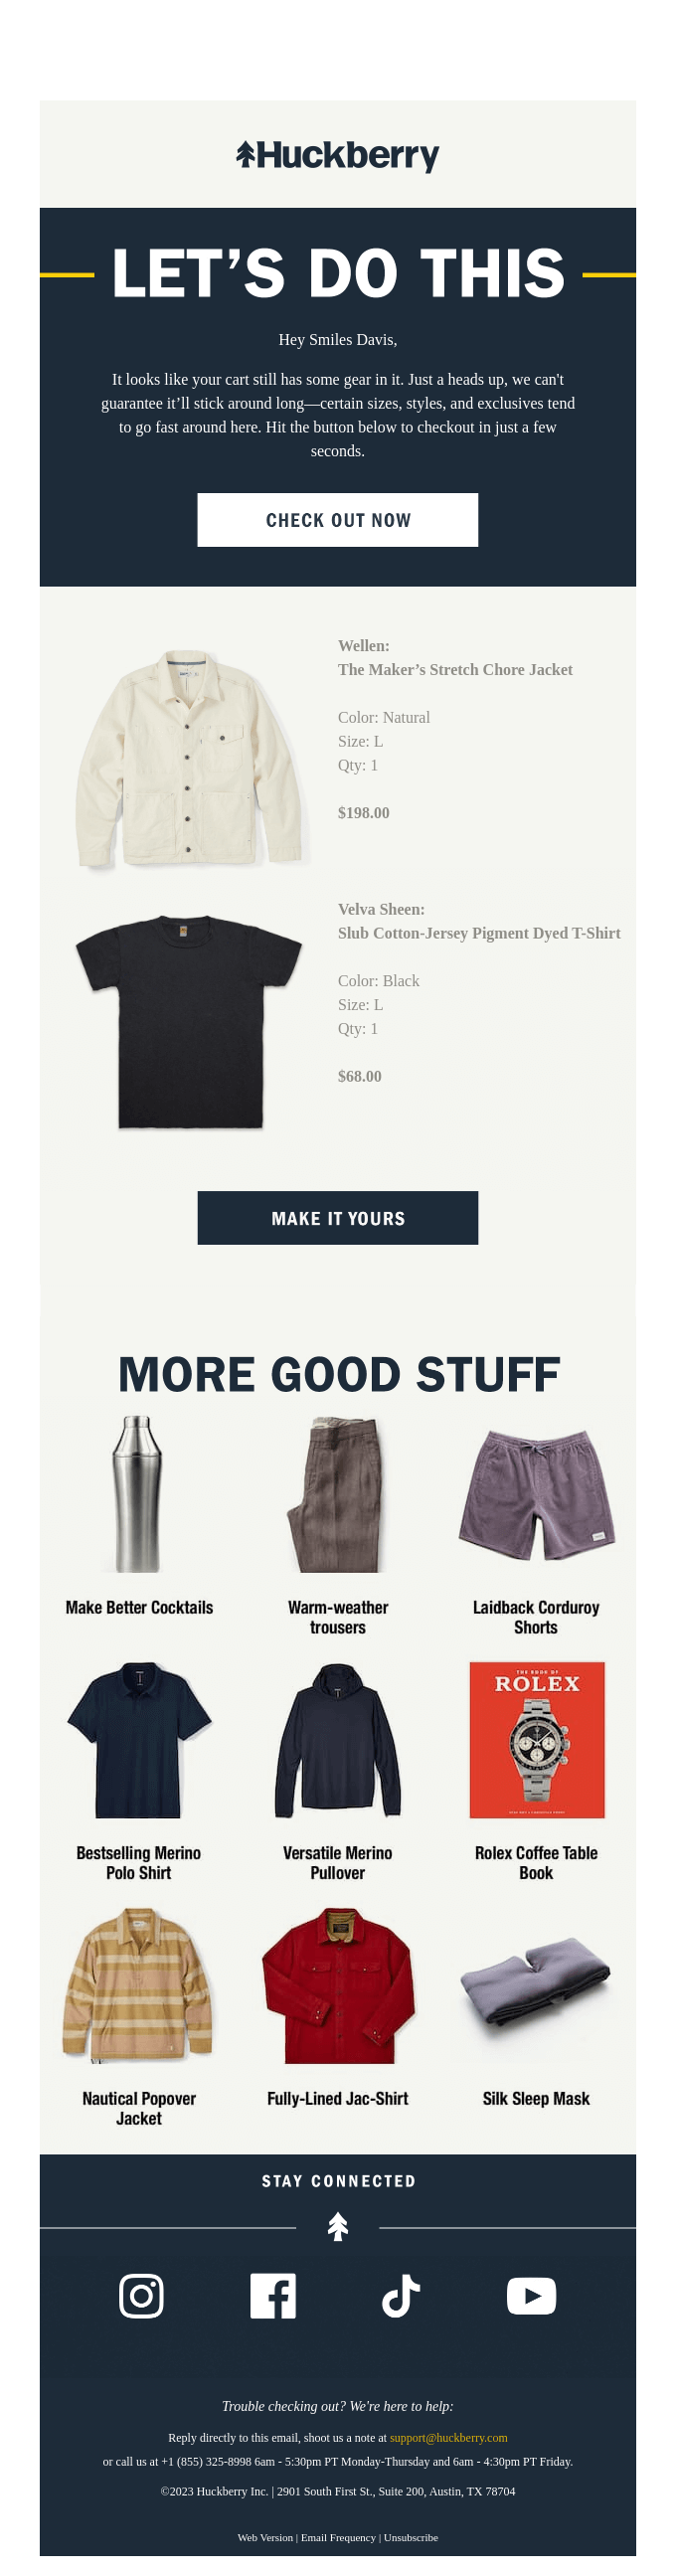 Your cart’s aging like a fine bourbon from Huckberry - Desktop Email ...